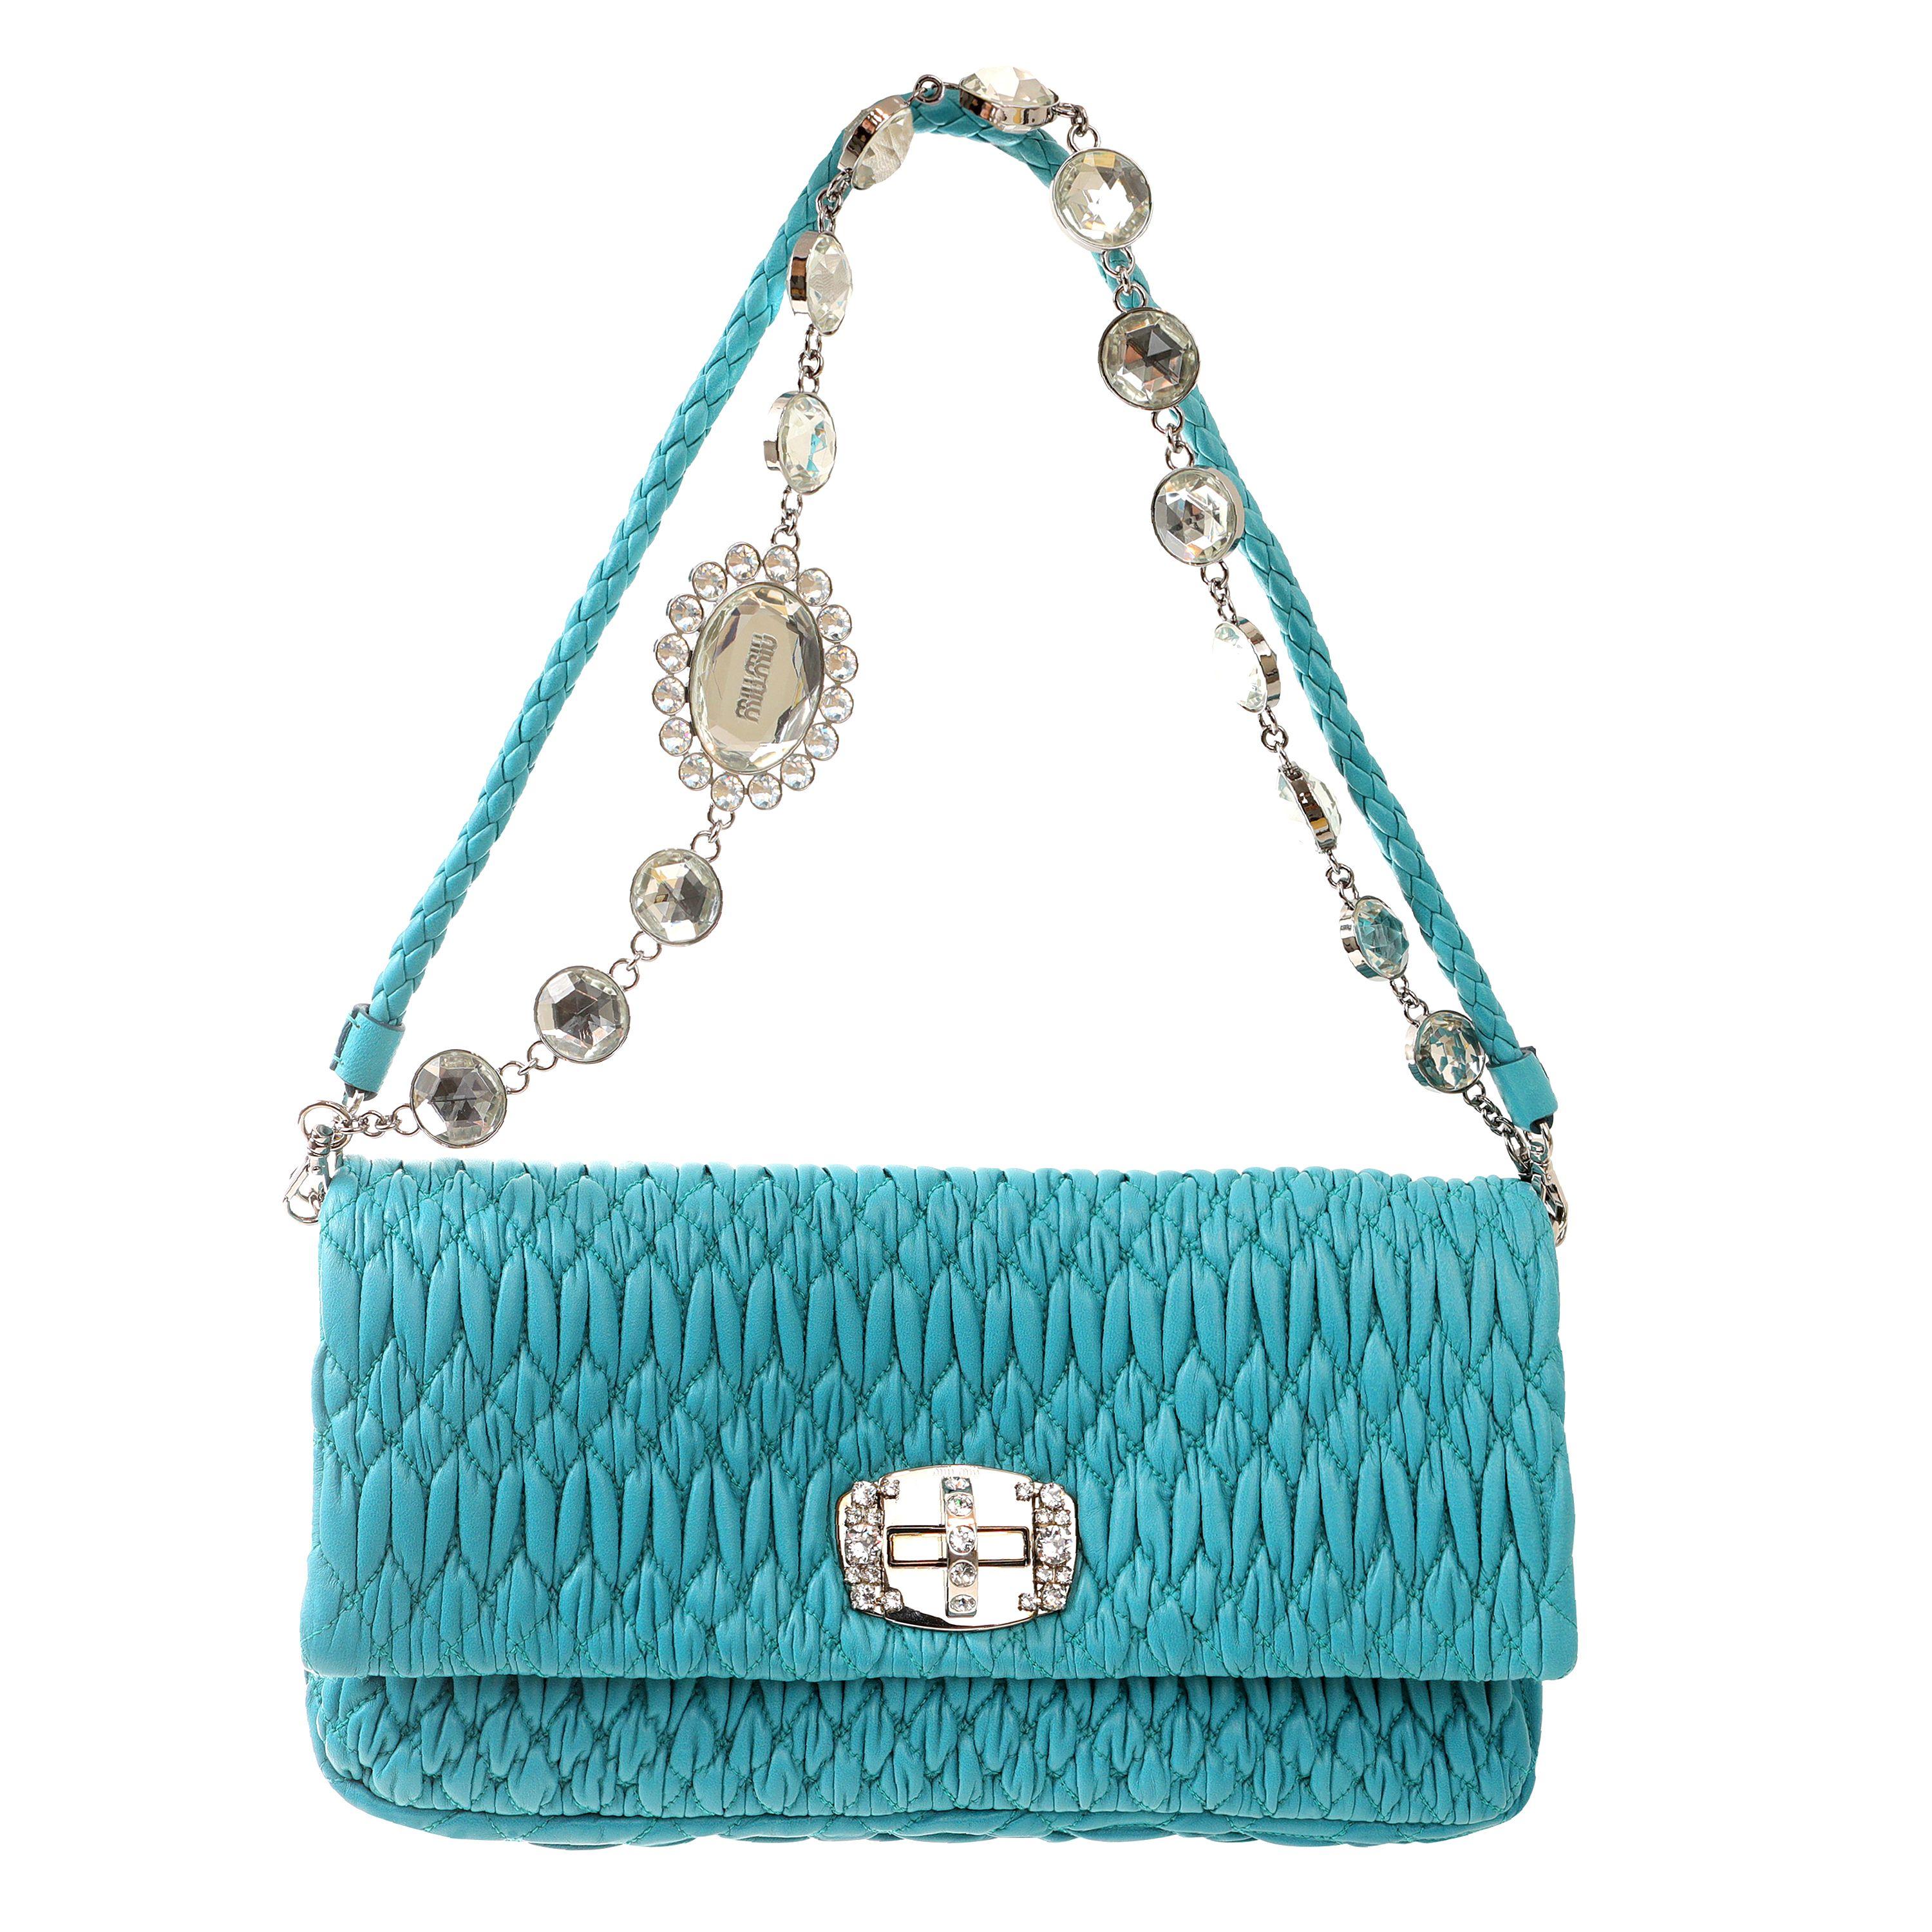 Miu Miu Turquoise Iconic Crystal Cloquè Small Bag with Silver Hardware In Excellent Condition For Sale In Palm Beach, FL